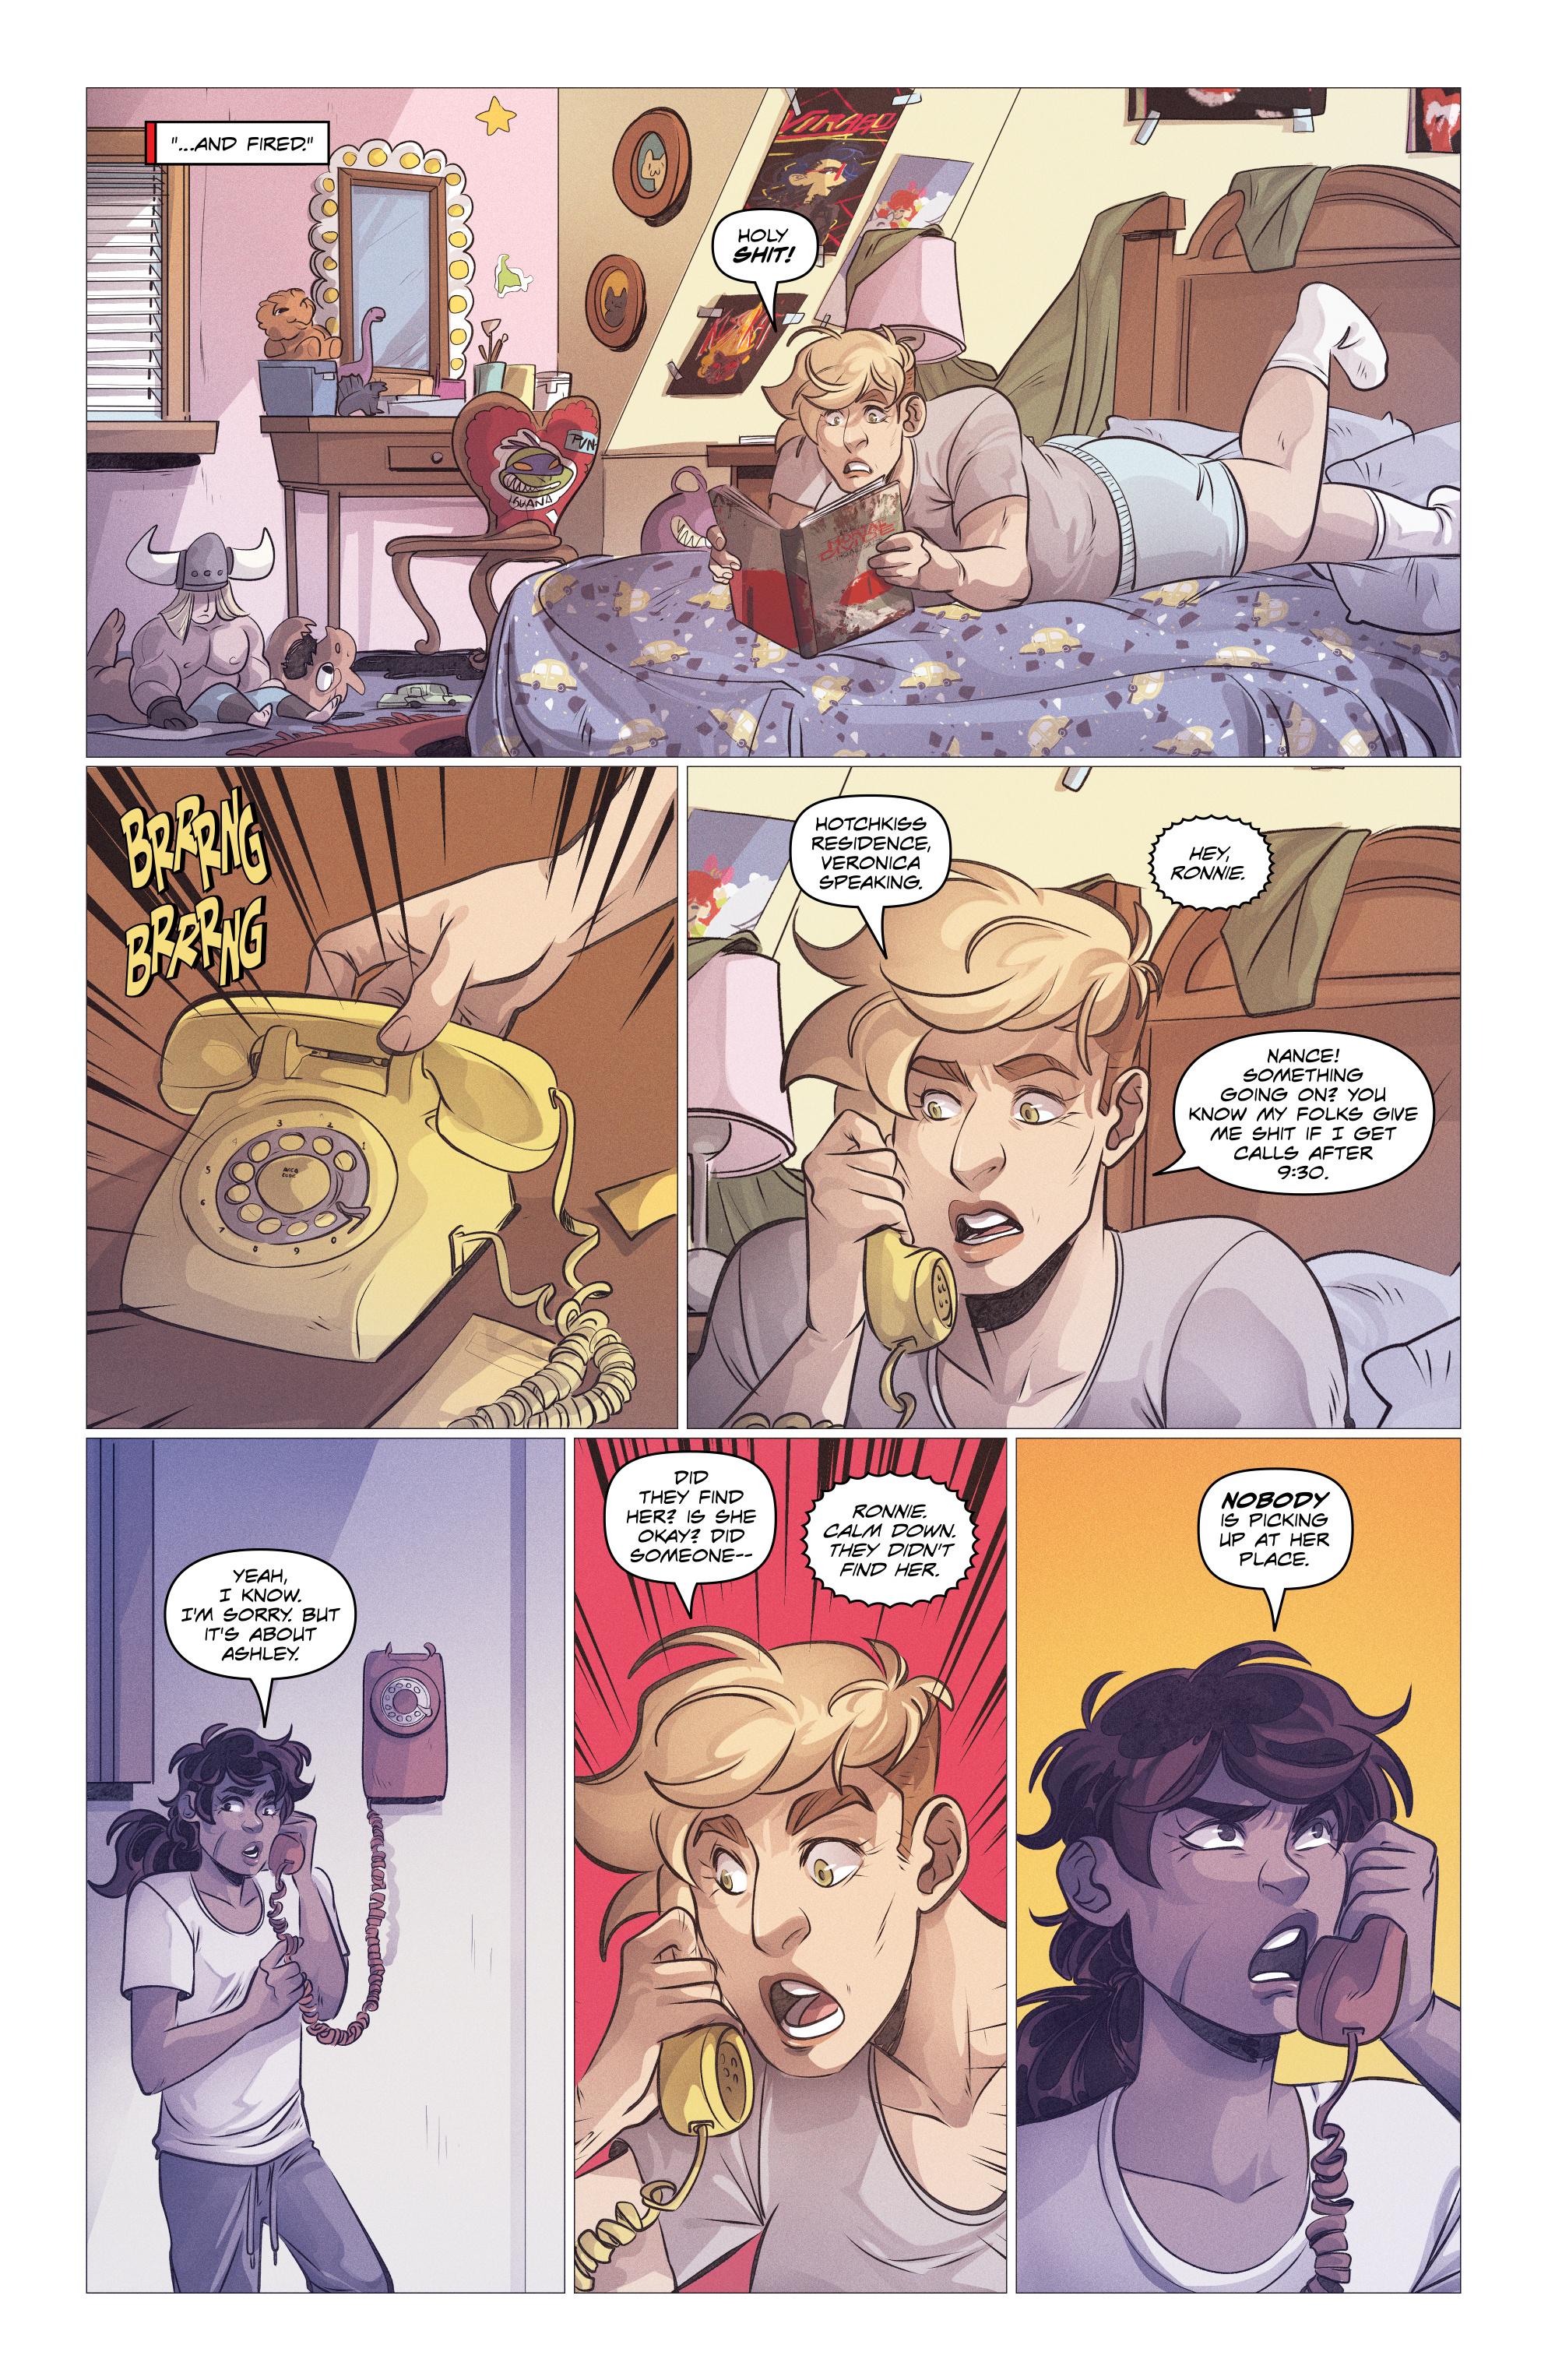 Morning in America (2019-): Chapter 3 - Page 4